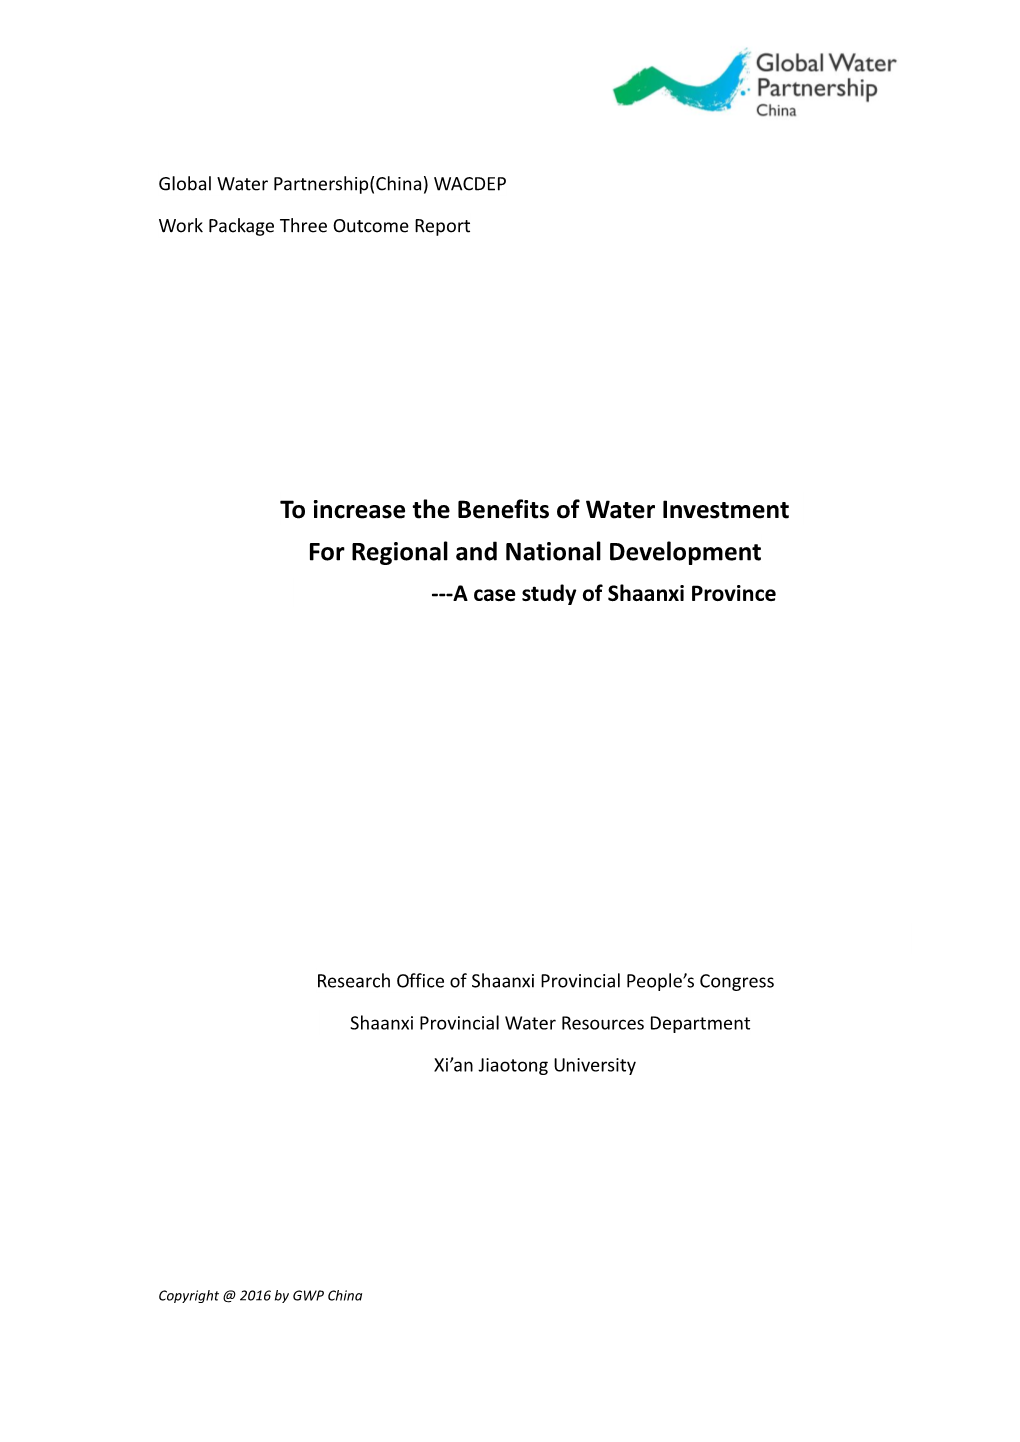 To Increase the Benefits of Water Investment for Regional and National Development ---A Case Study of Shaanxi Province